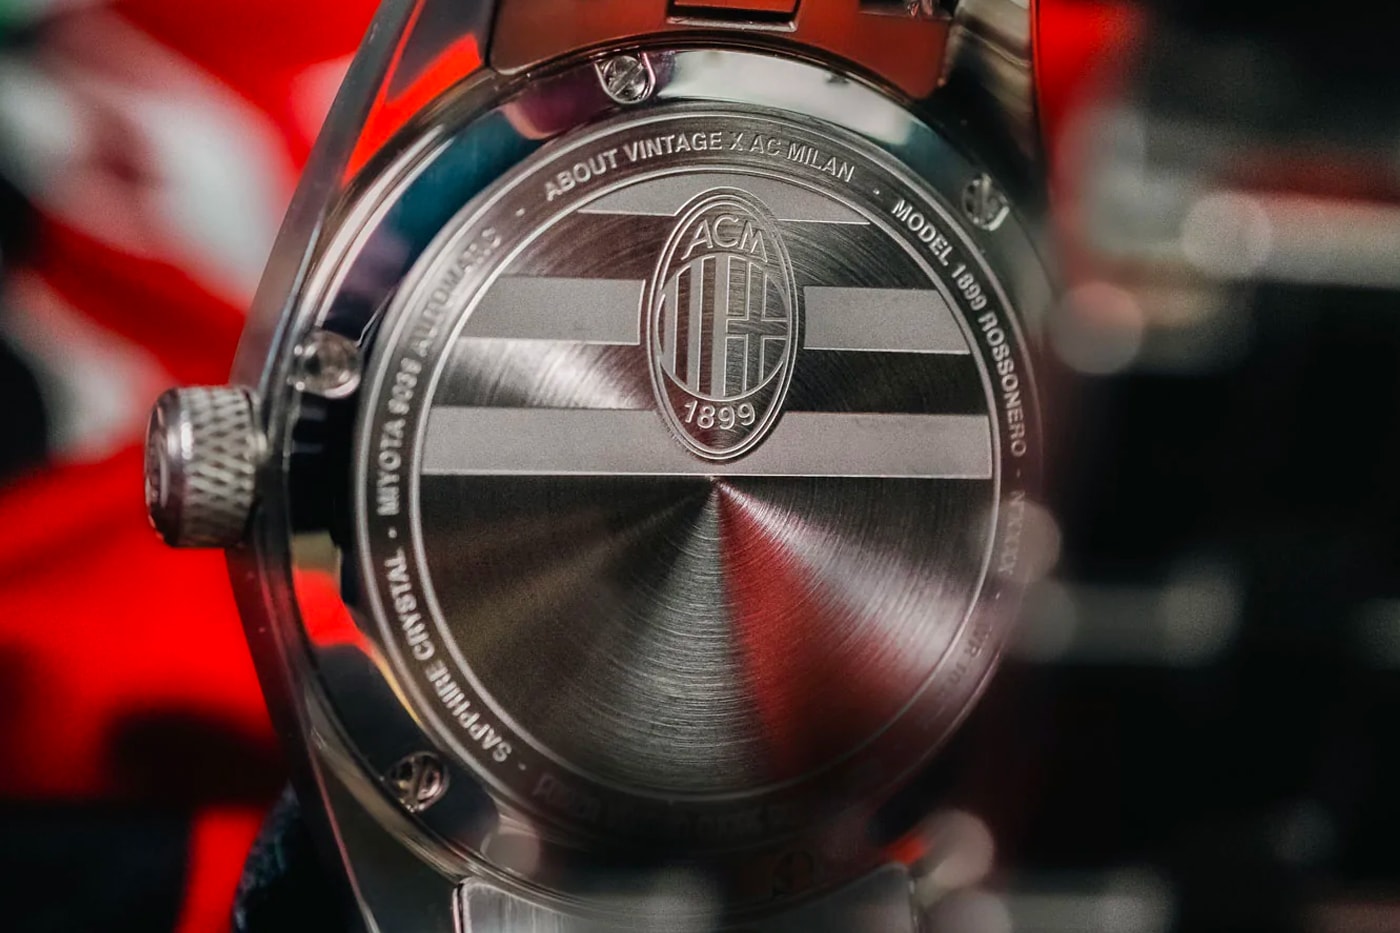 About Vintage 1899 Rossonero Automatic AC Milan